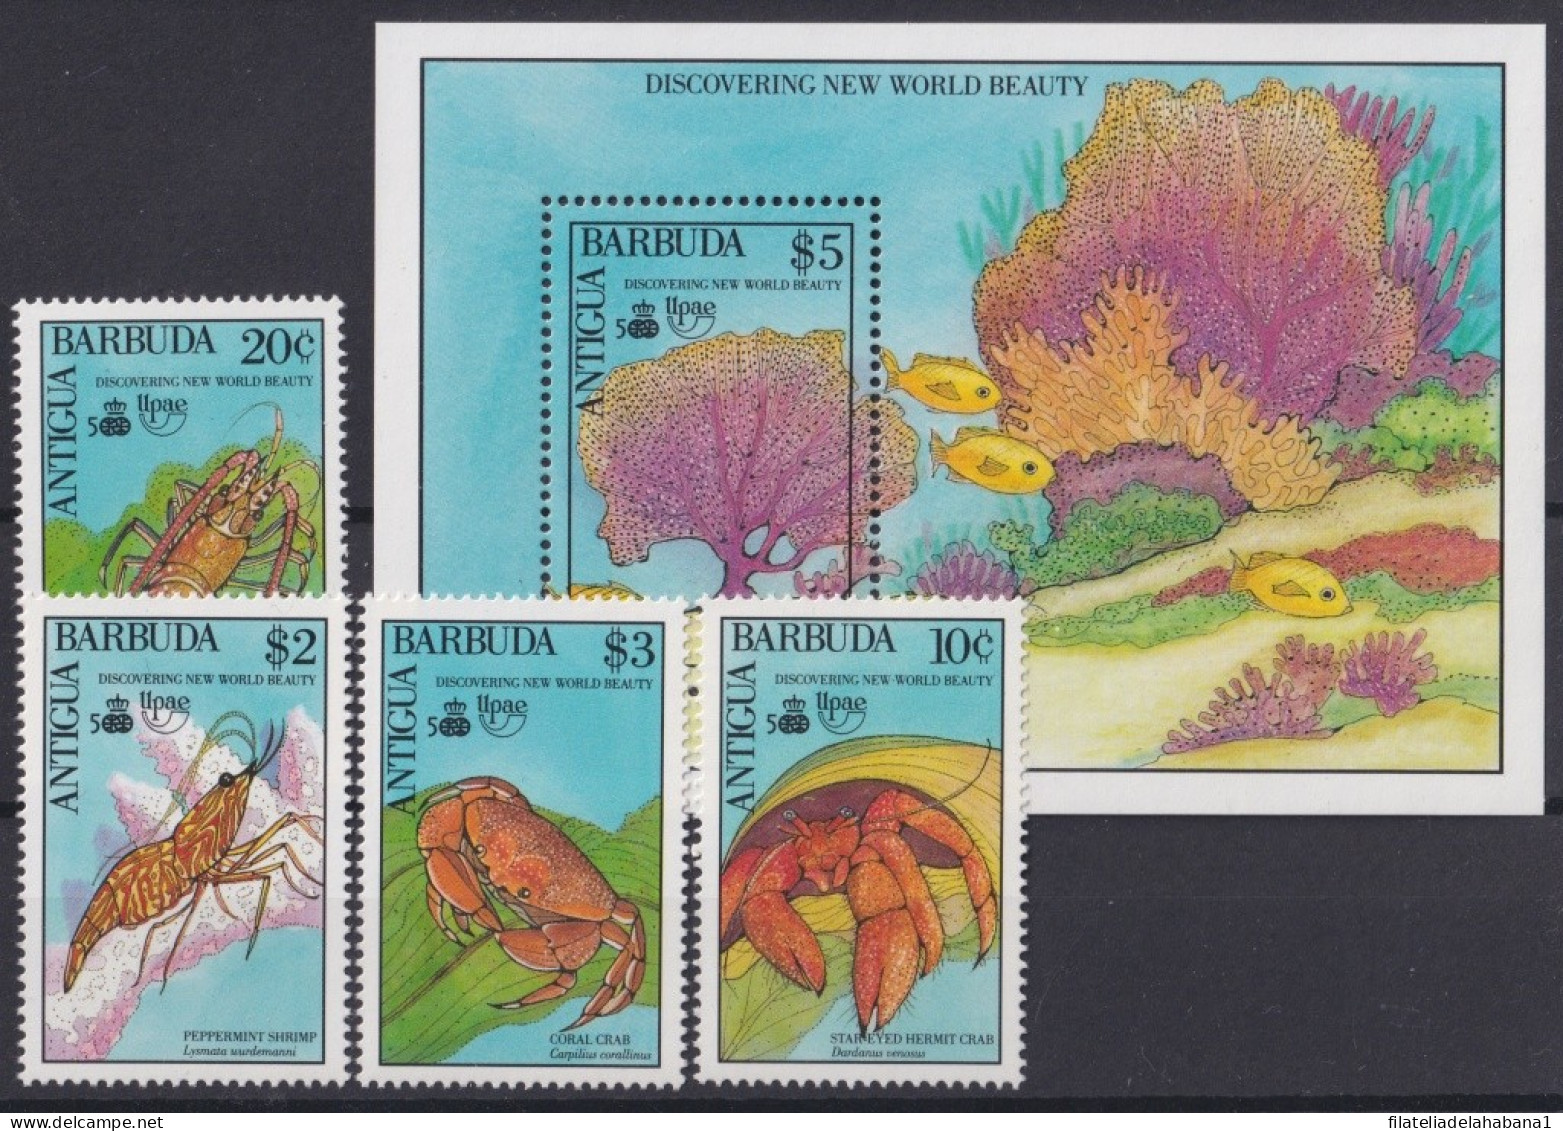 F-EX46037 ANTIGUA BARBUDA MNH 1990 UPAE DISCOVERY DISCOVERY CORAL LOBSTER.  - Crustaceans